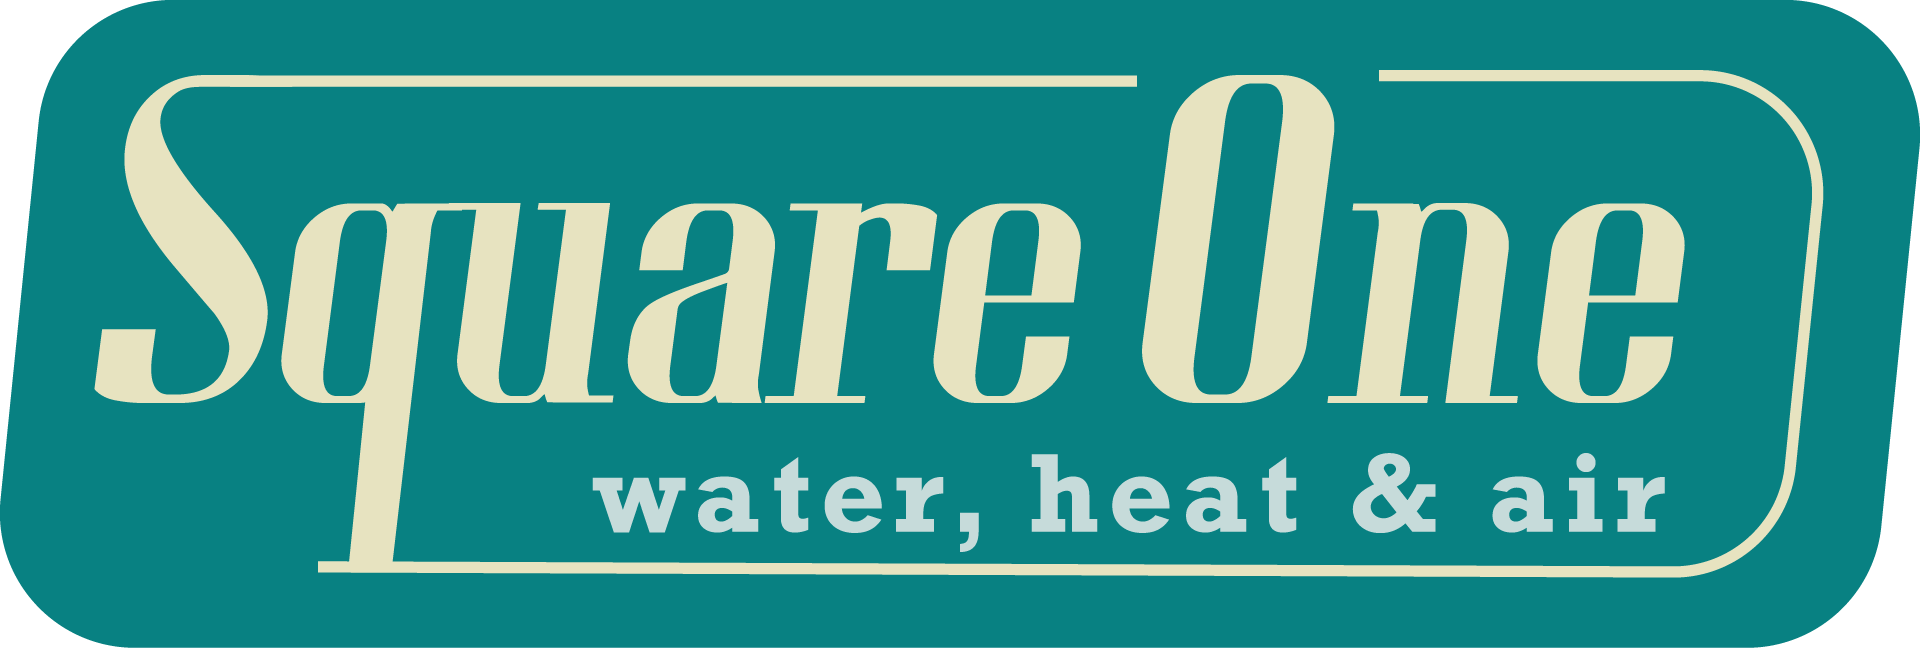 Square One Water Heat And Air Inc.